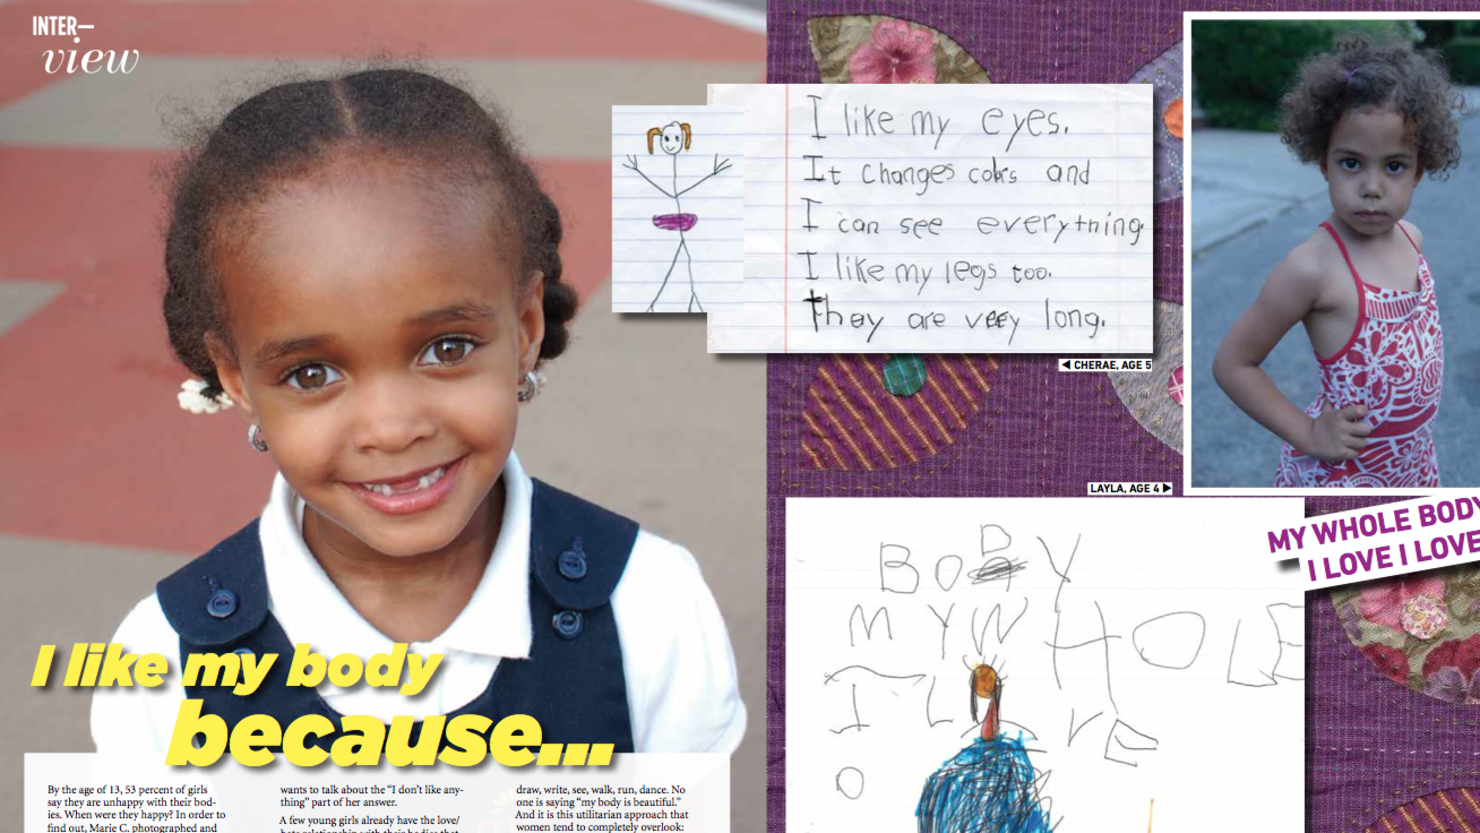 The first issue of Interrupt magazine asks 8-year-old girls what they like about their bodies.